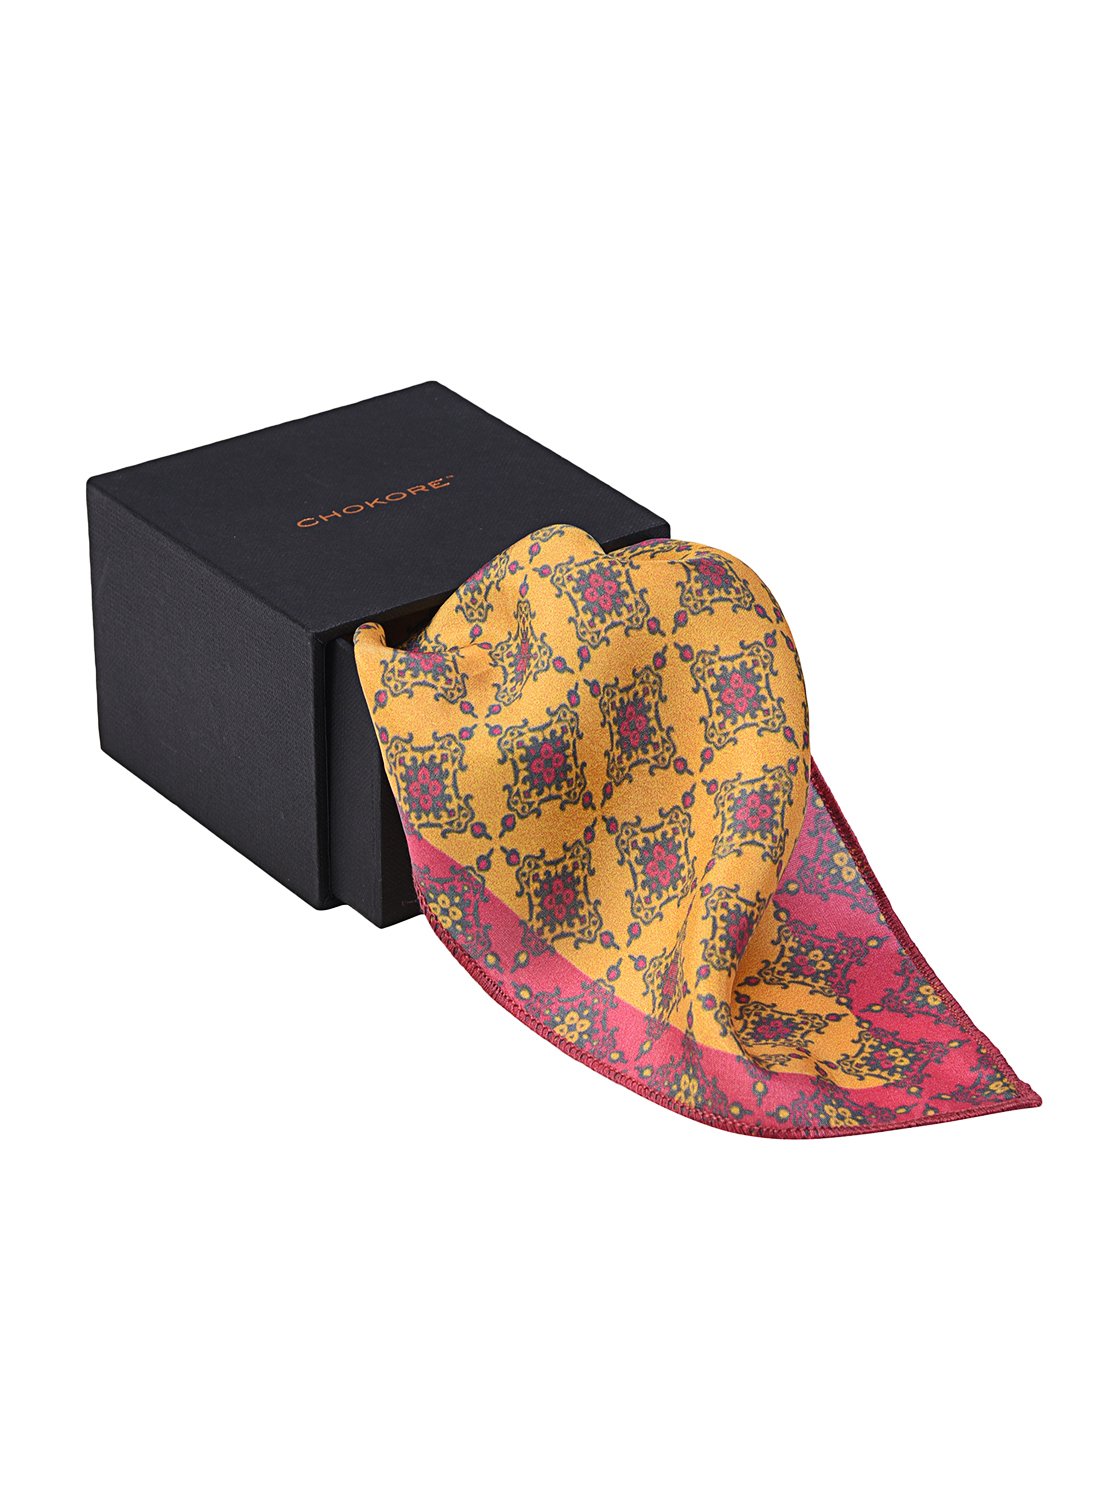 Chokore Orange & Magenta Silk Pocket Square from Indian at Heart collection